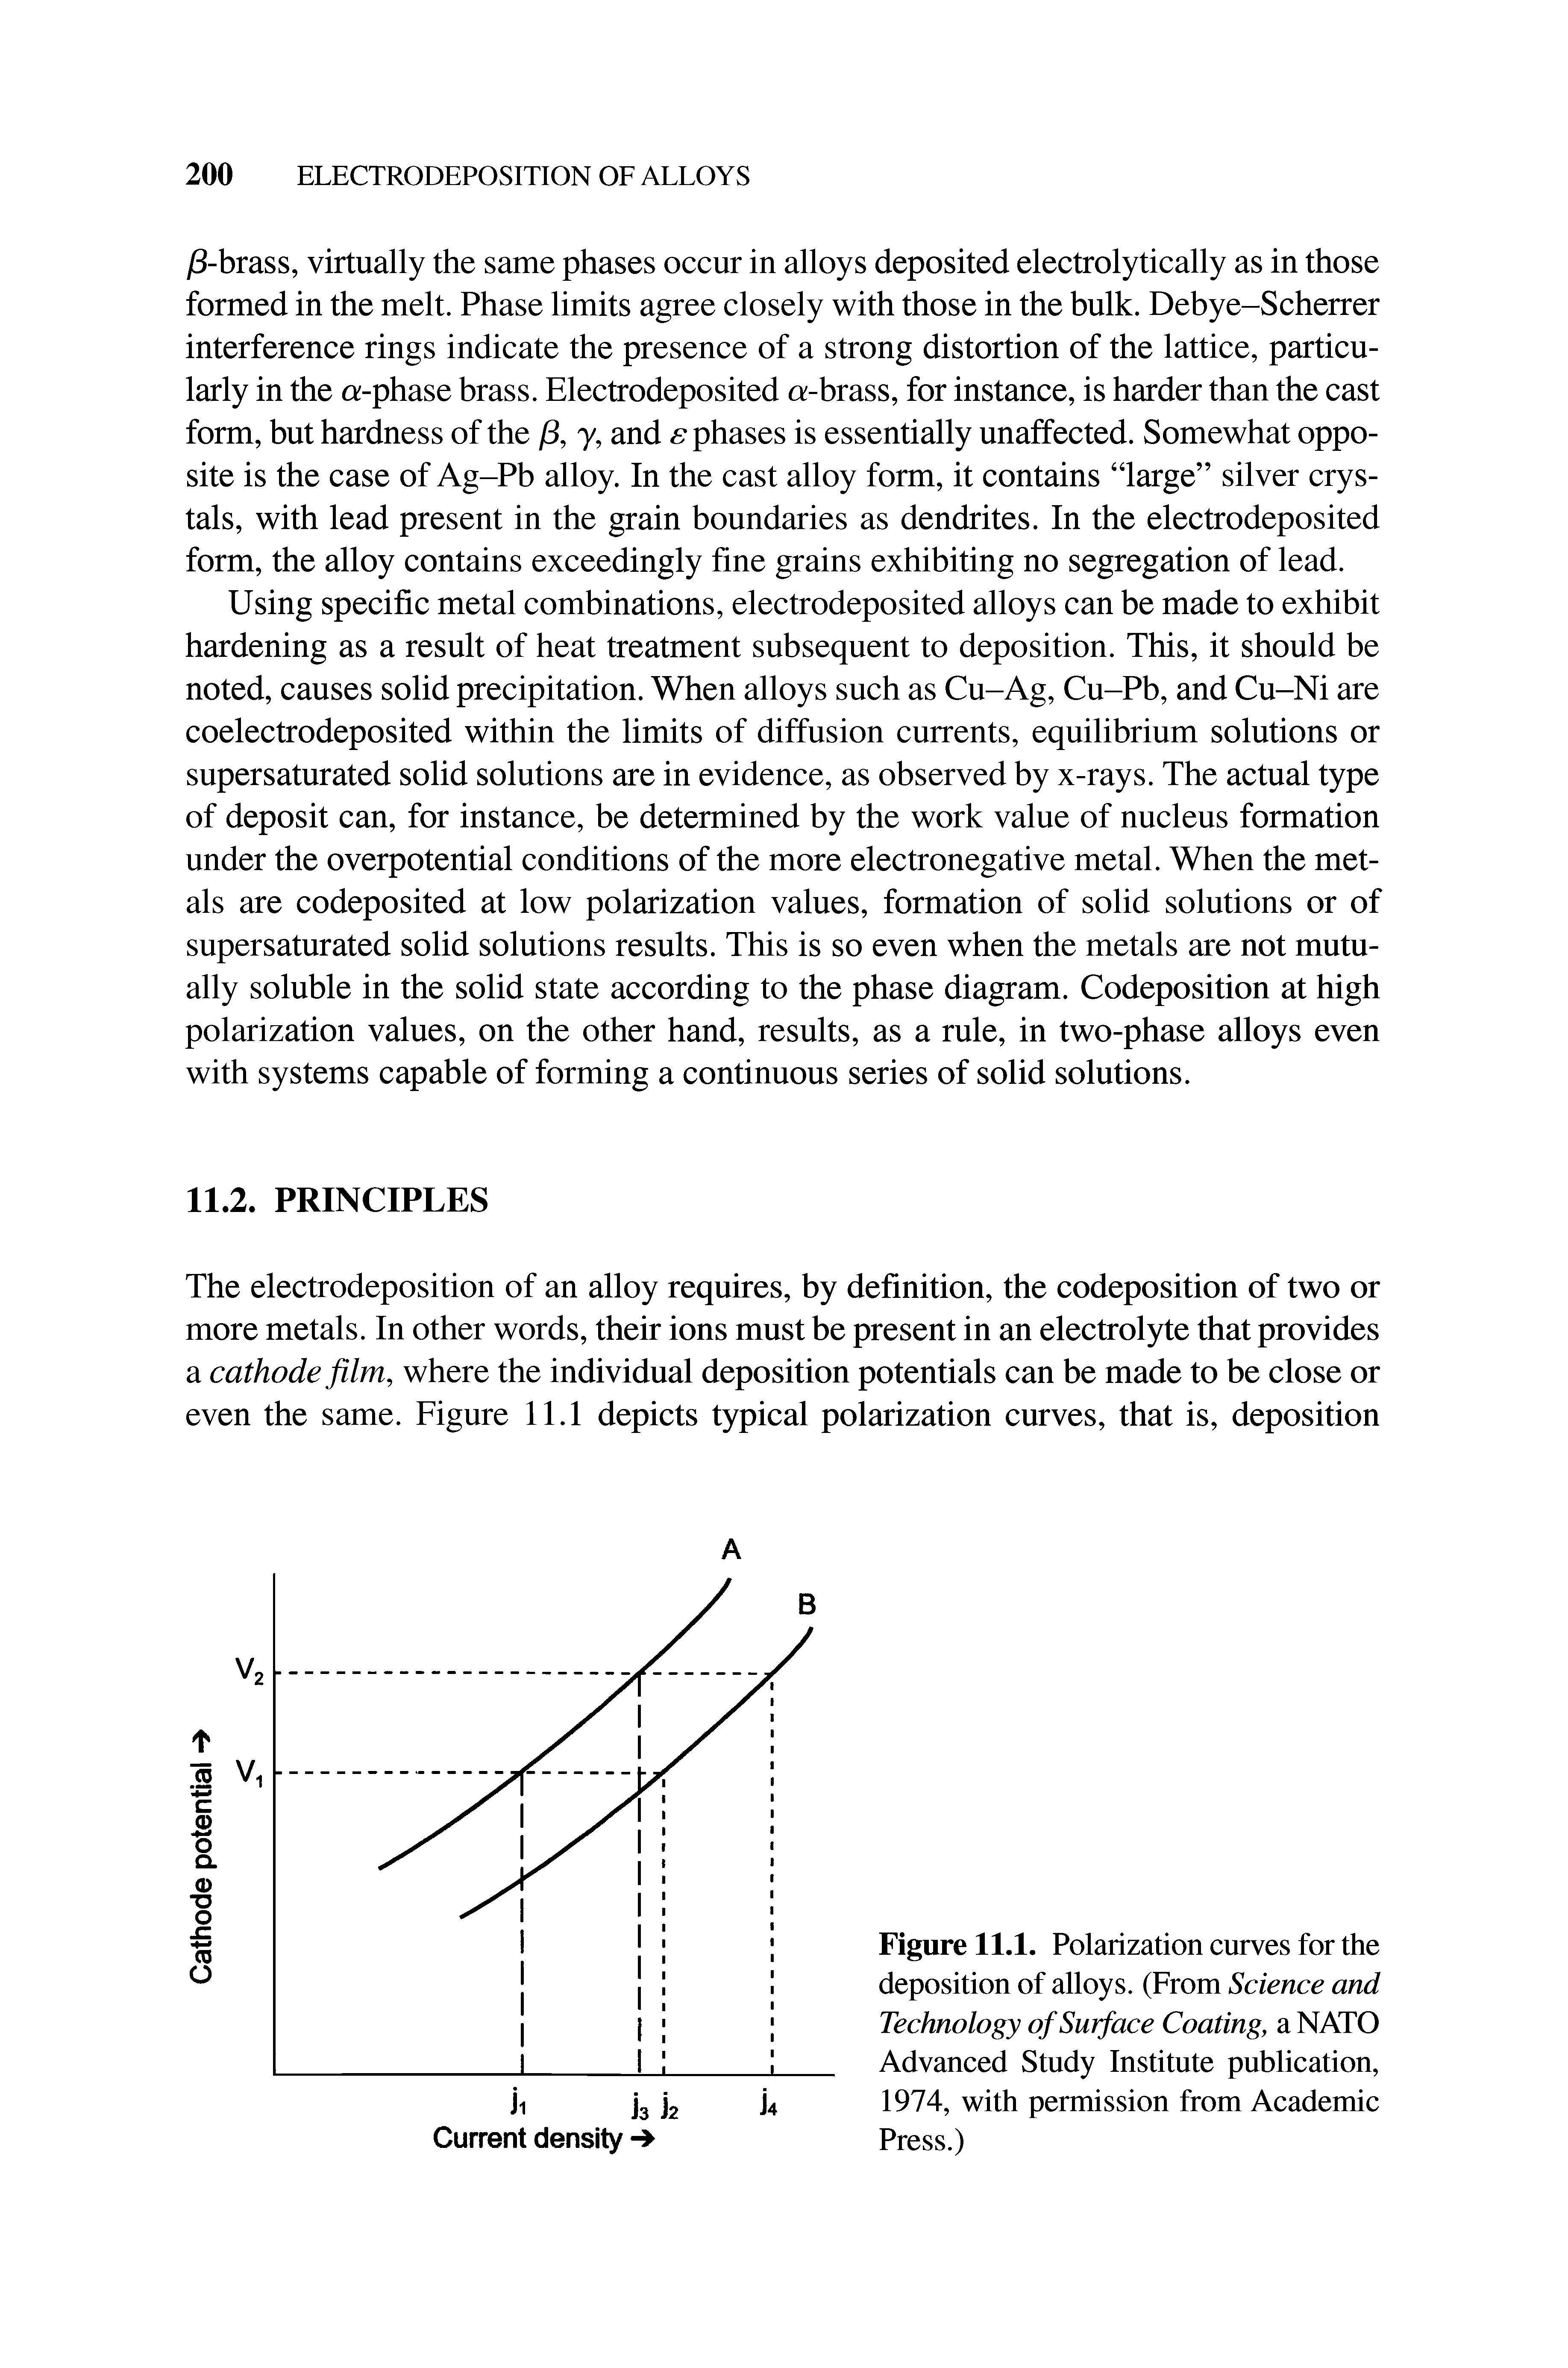 Figure 11.1. Polarization curves for the deposition of alloys. (From Science and Technology of Surface Coating, a NATO Advanced Study Institute publication, 1974, with permission from Academic Press.)...